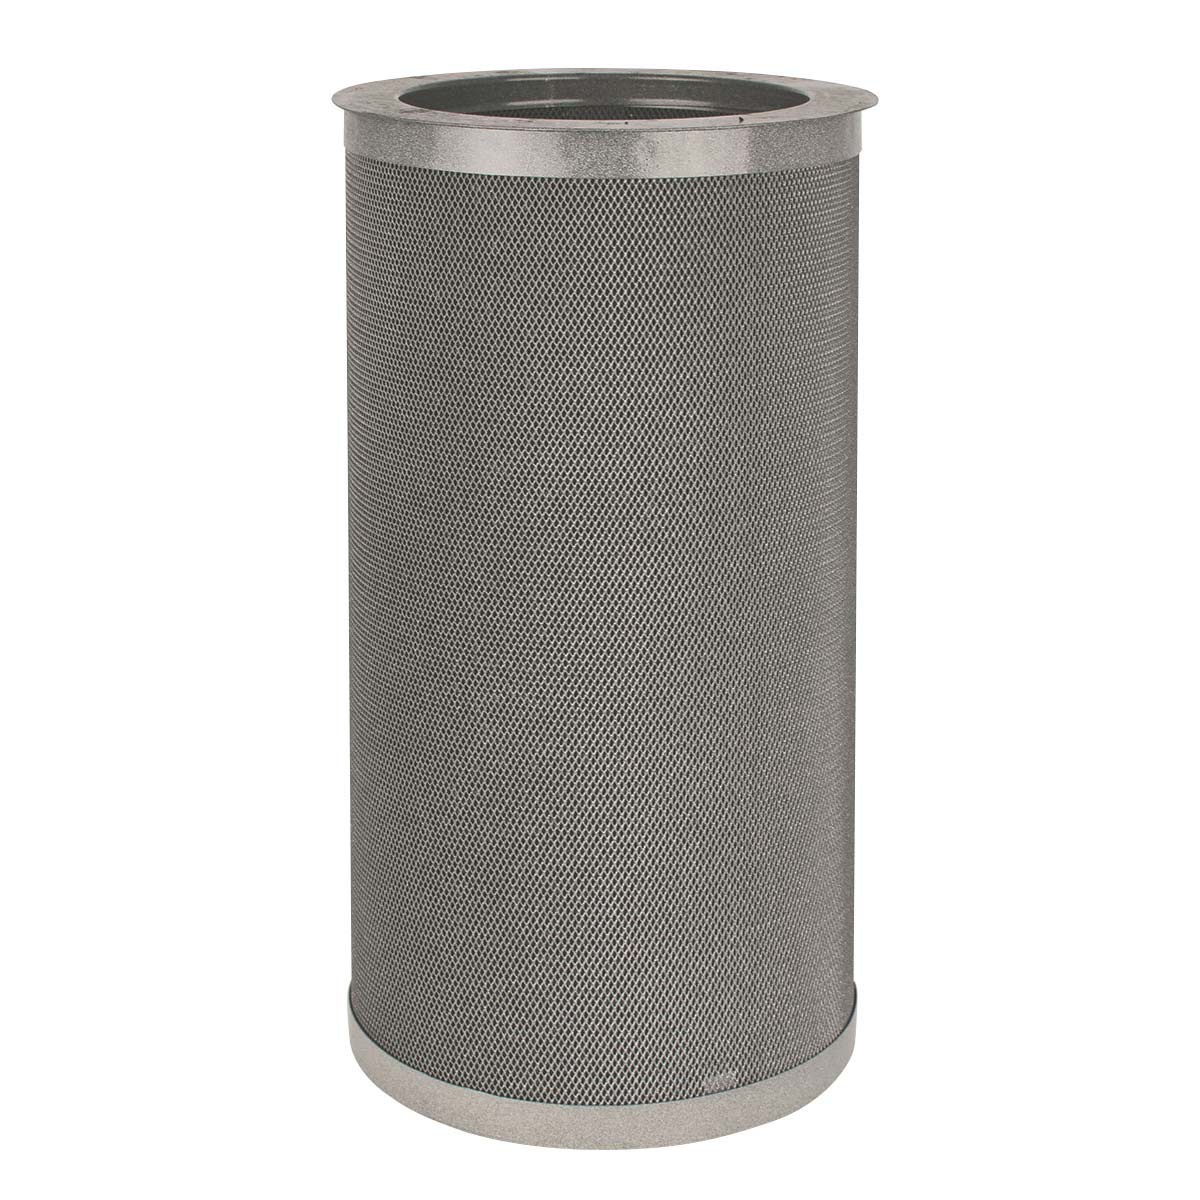 3rd Stage Carbon Canister Filter - Reduce Odor and VOC - NorAir 800 - Click Image to Close